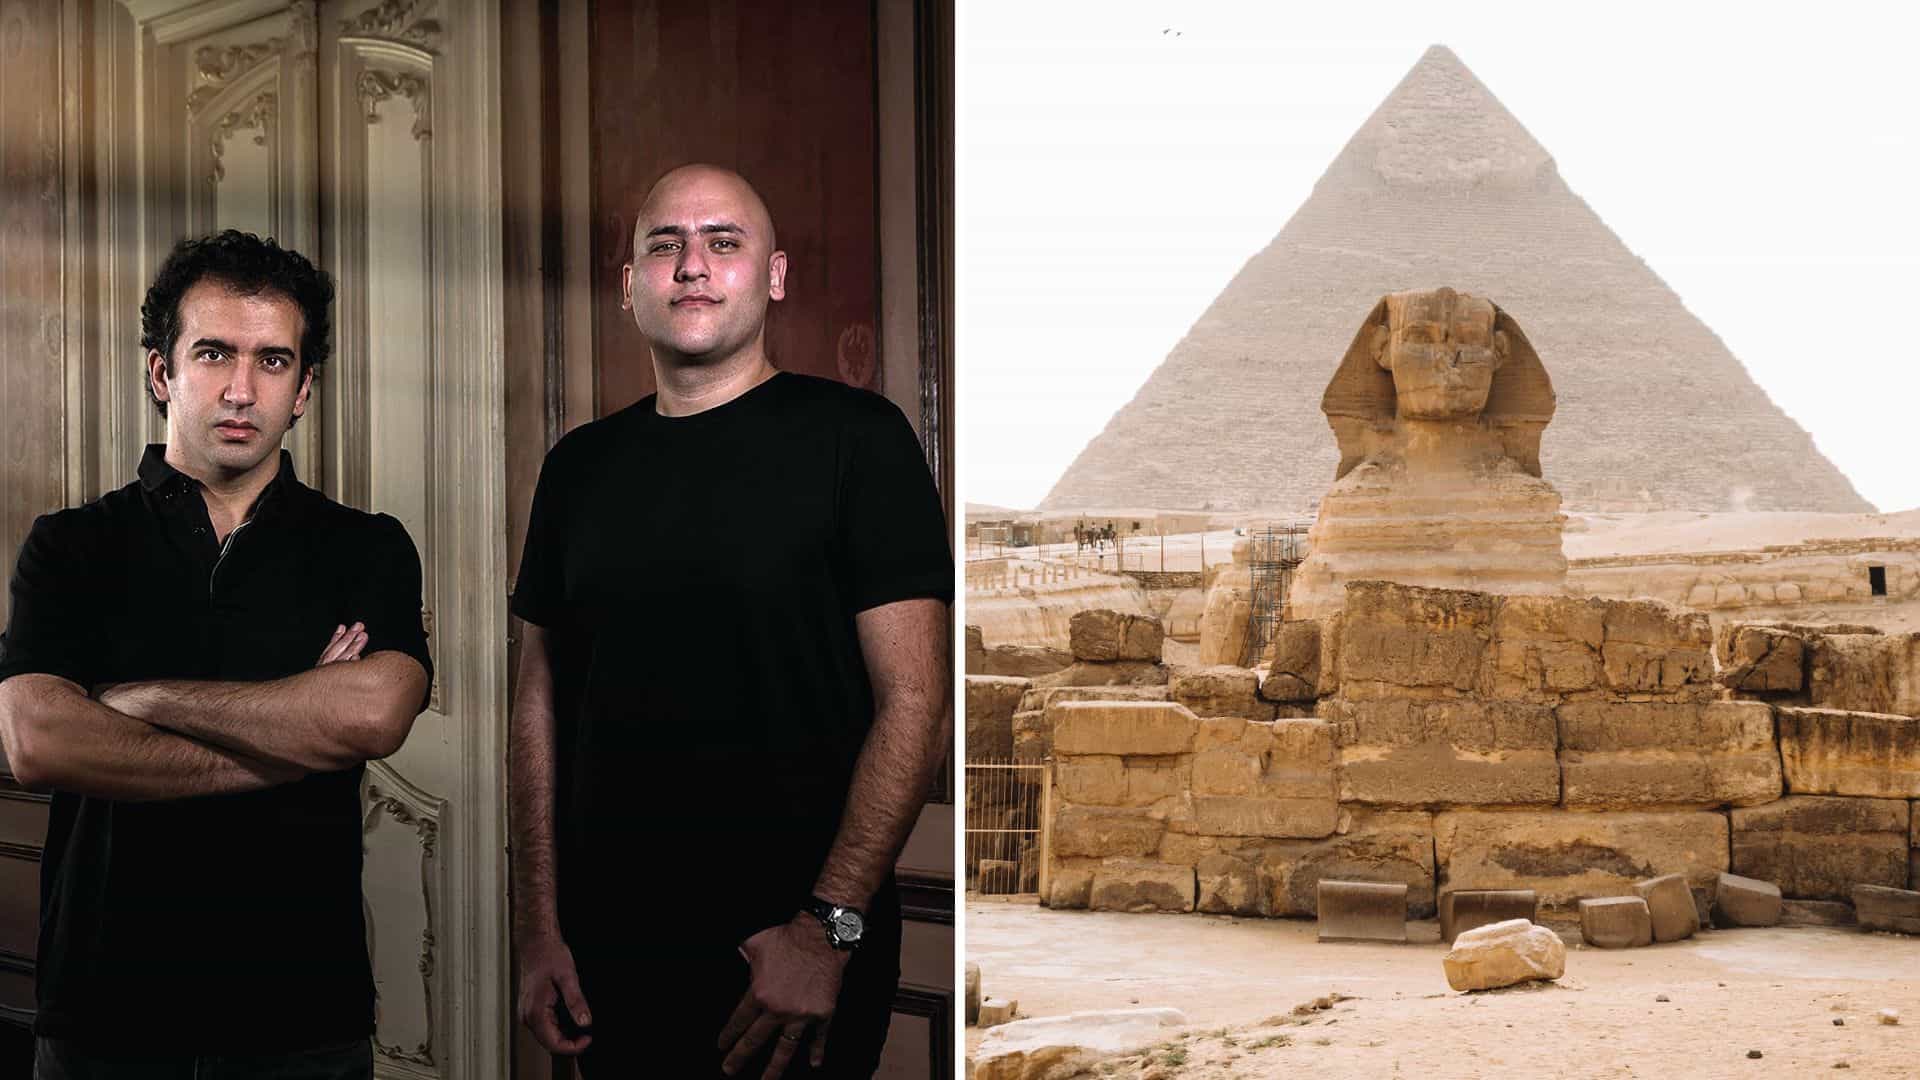 Aly & Fila set for huge FSOE800 show at The Great Pyramids of Giza